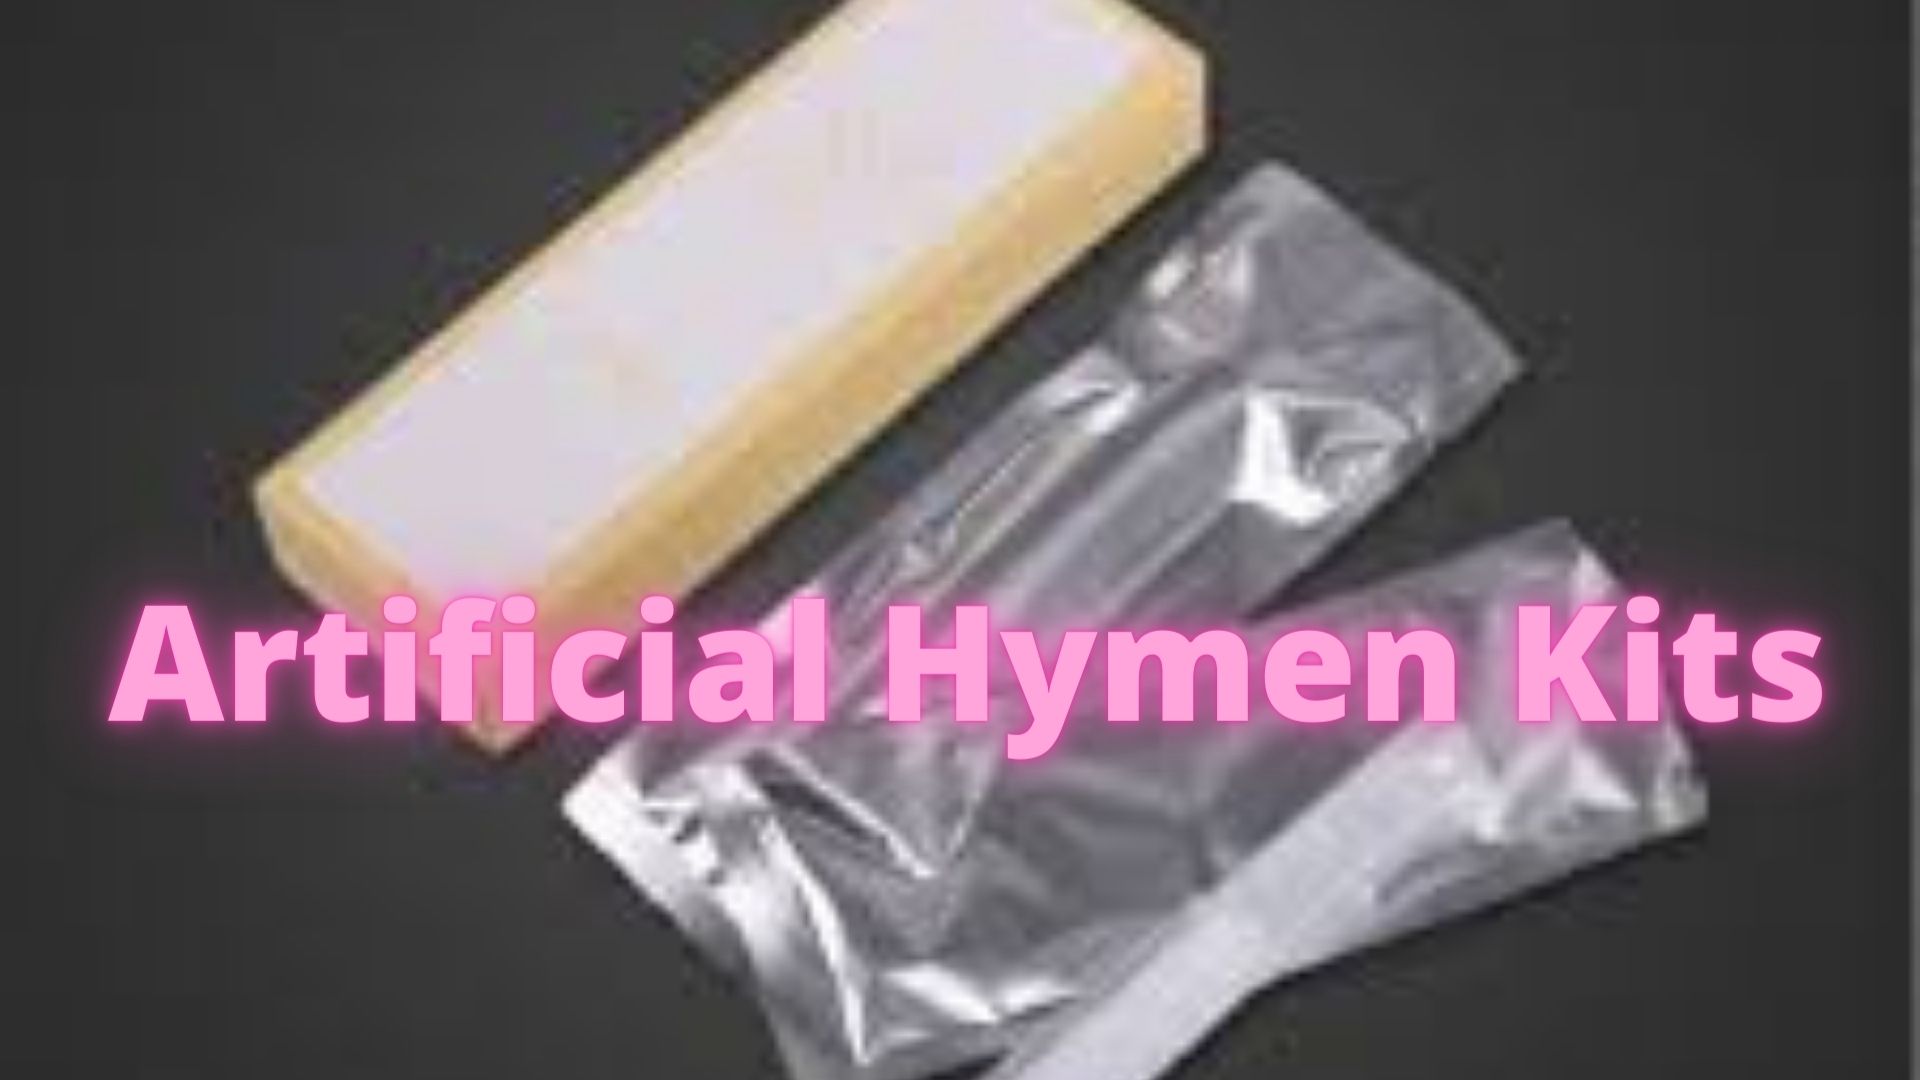 A New Way To Fake Virginity The Artificial Hymen Kit